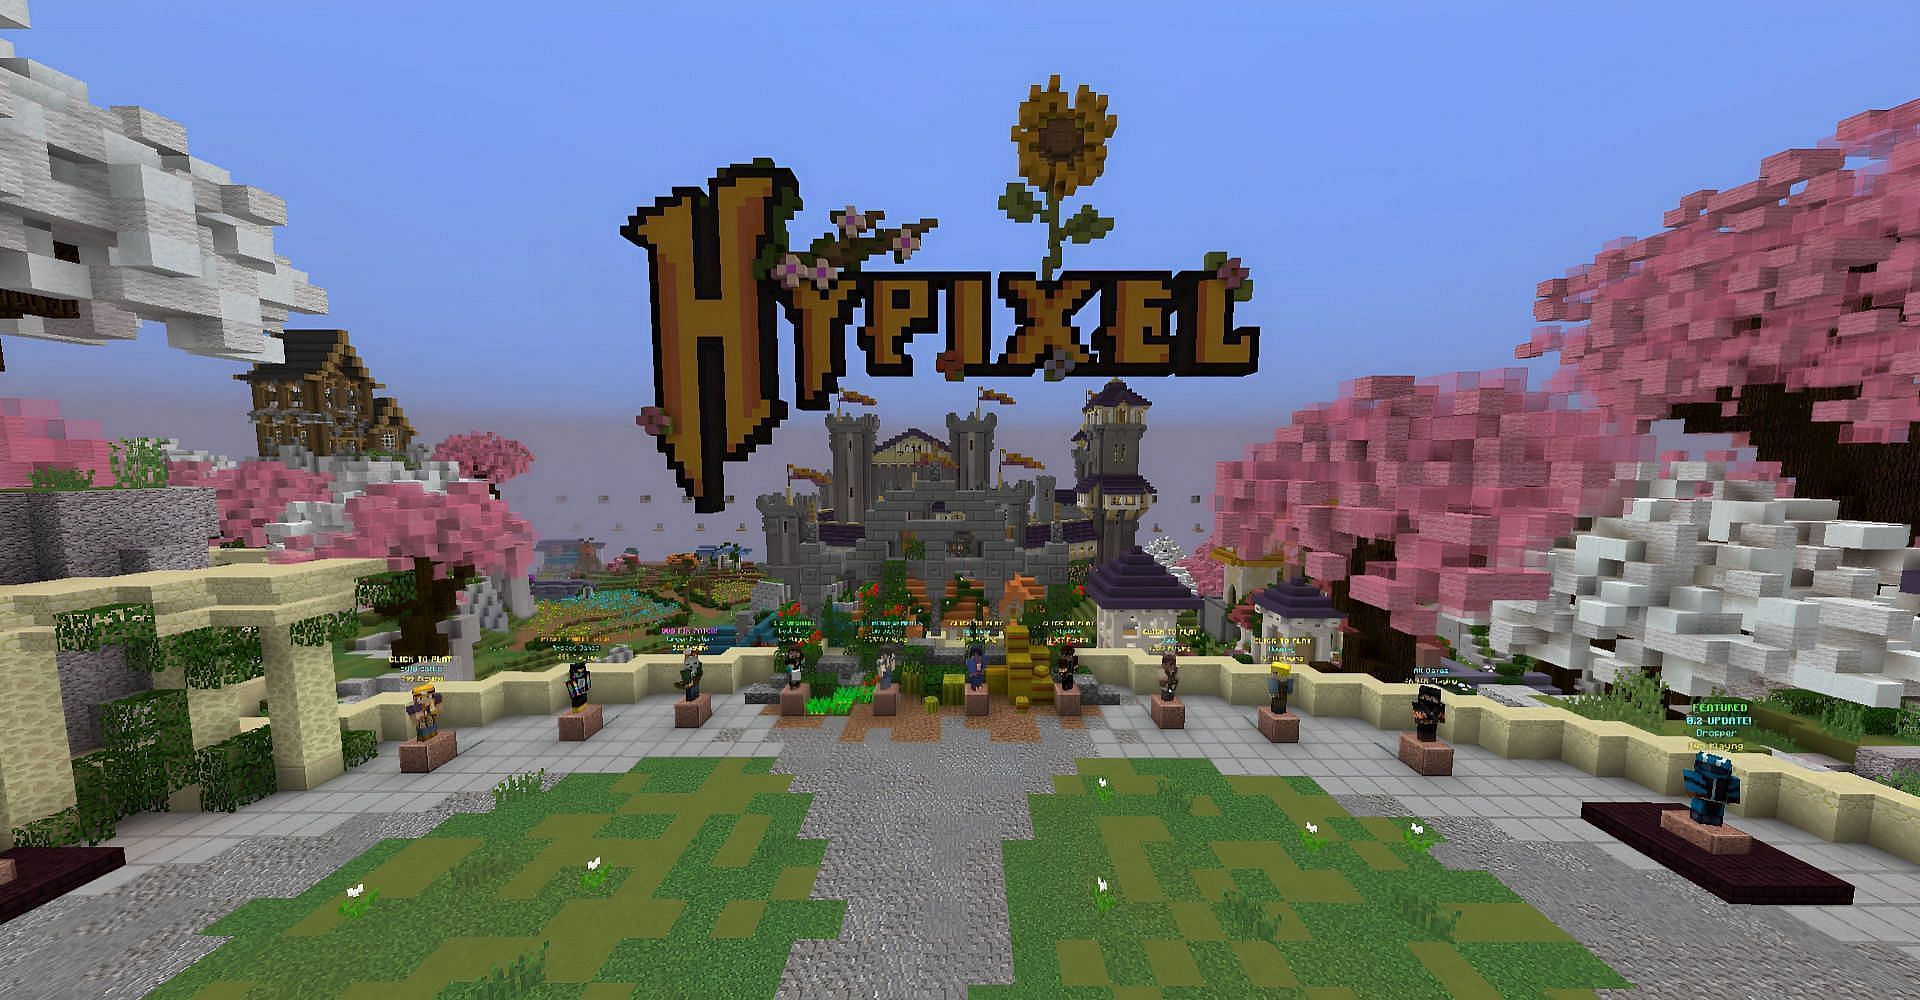 Hypixel is the most popular Minecraft server (Image via Mojang)